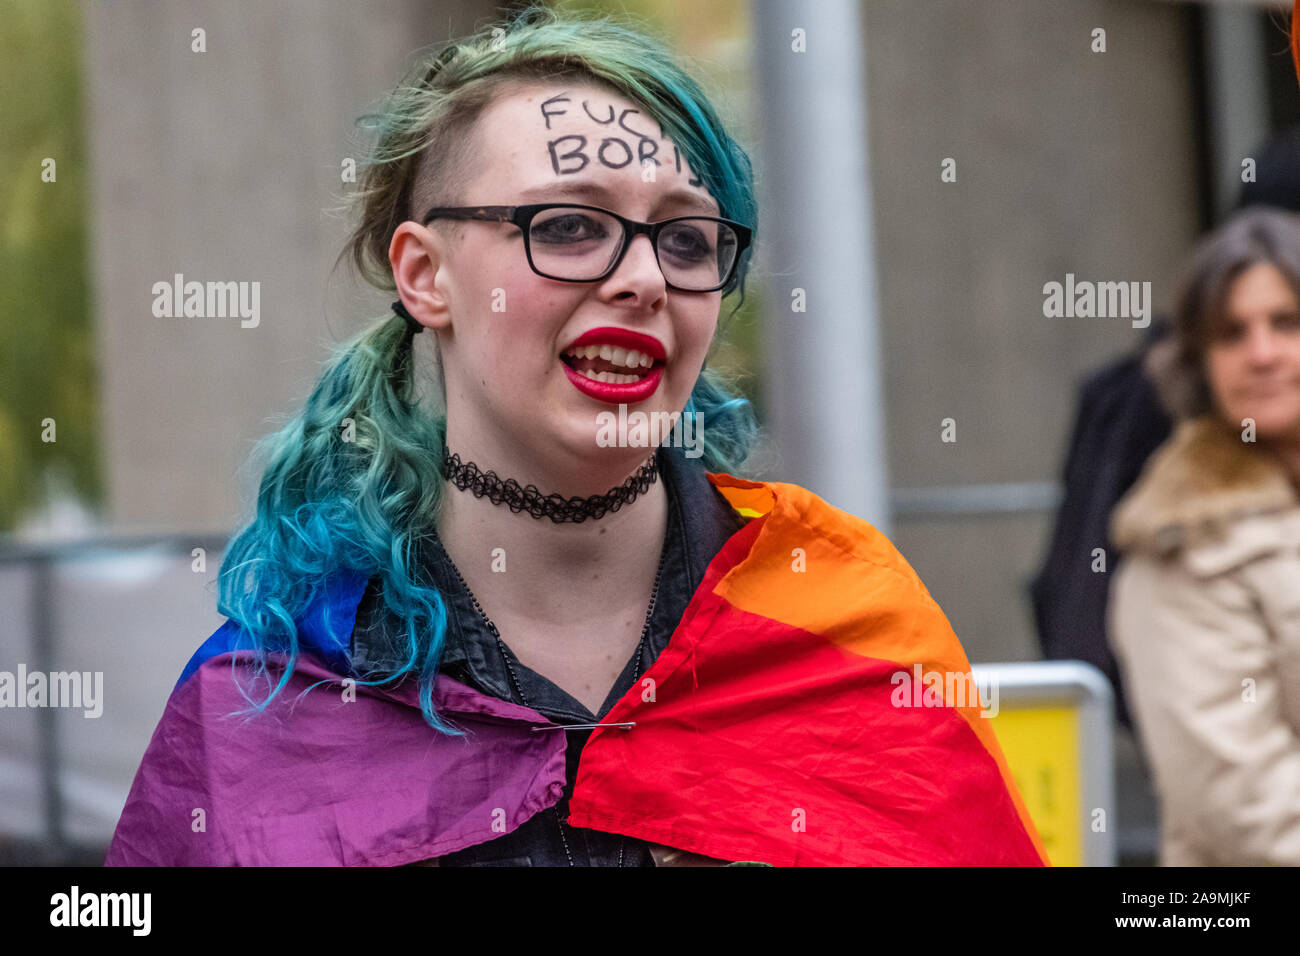 London, UK. 16th November 2019. A protester in a rainbow flag with a message for Boris on her forehead as protesters from FCKBoris at Brunel University in Uxbridge  urging everyone to register and vote against Boris Johnson and kick him out for his racist, elitist politics.  Johnson had a majority of just over 5 thousand in 2017 and Labour candidate Ali Milani has strong hopes of beating him and the other 10 candidates. Peter Marshall/Alamy Live News Stock Photo